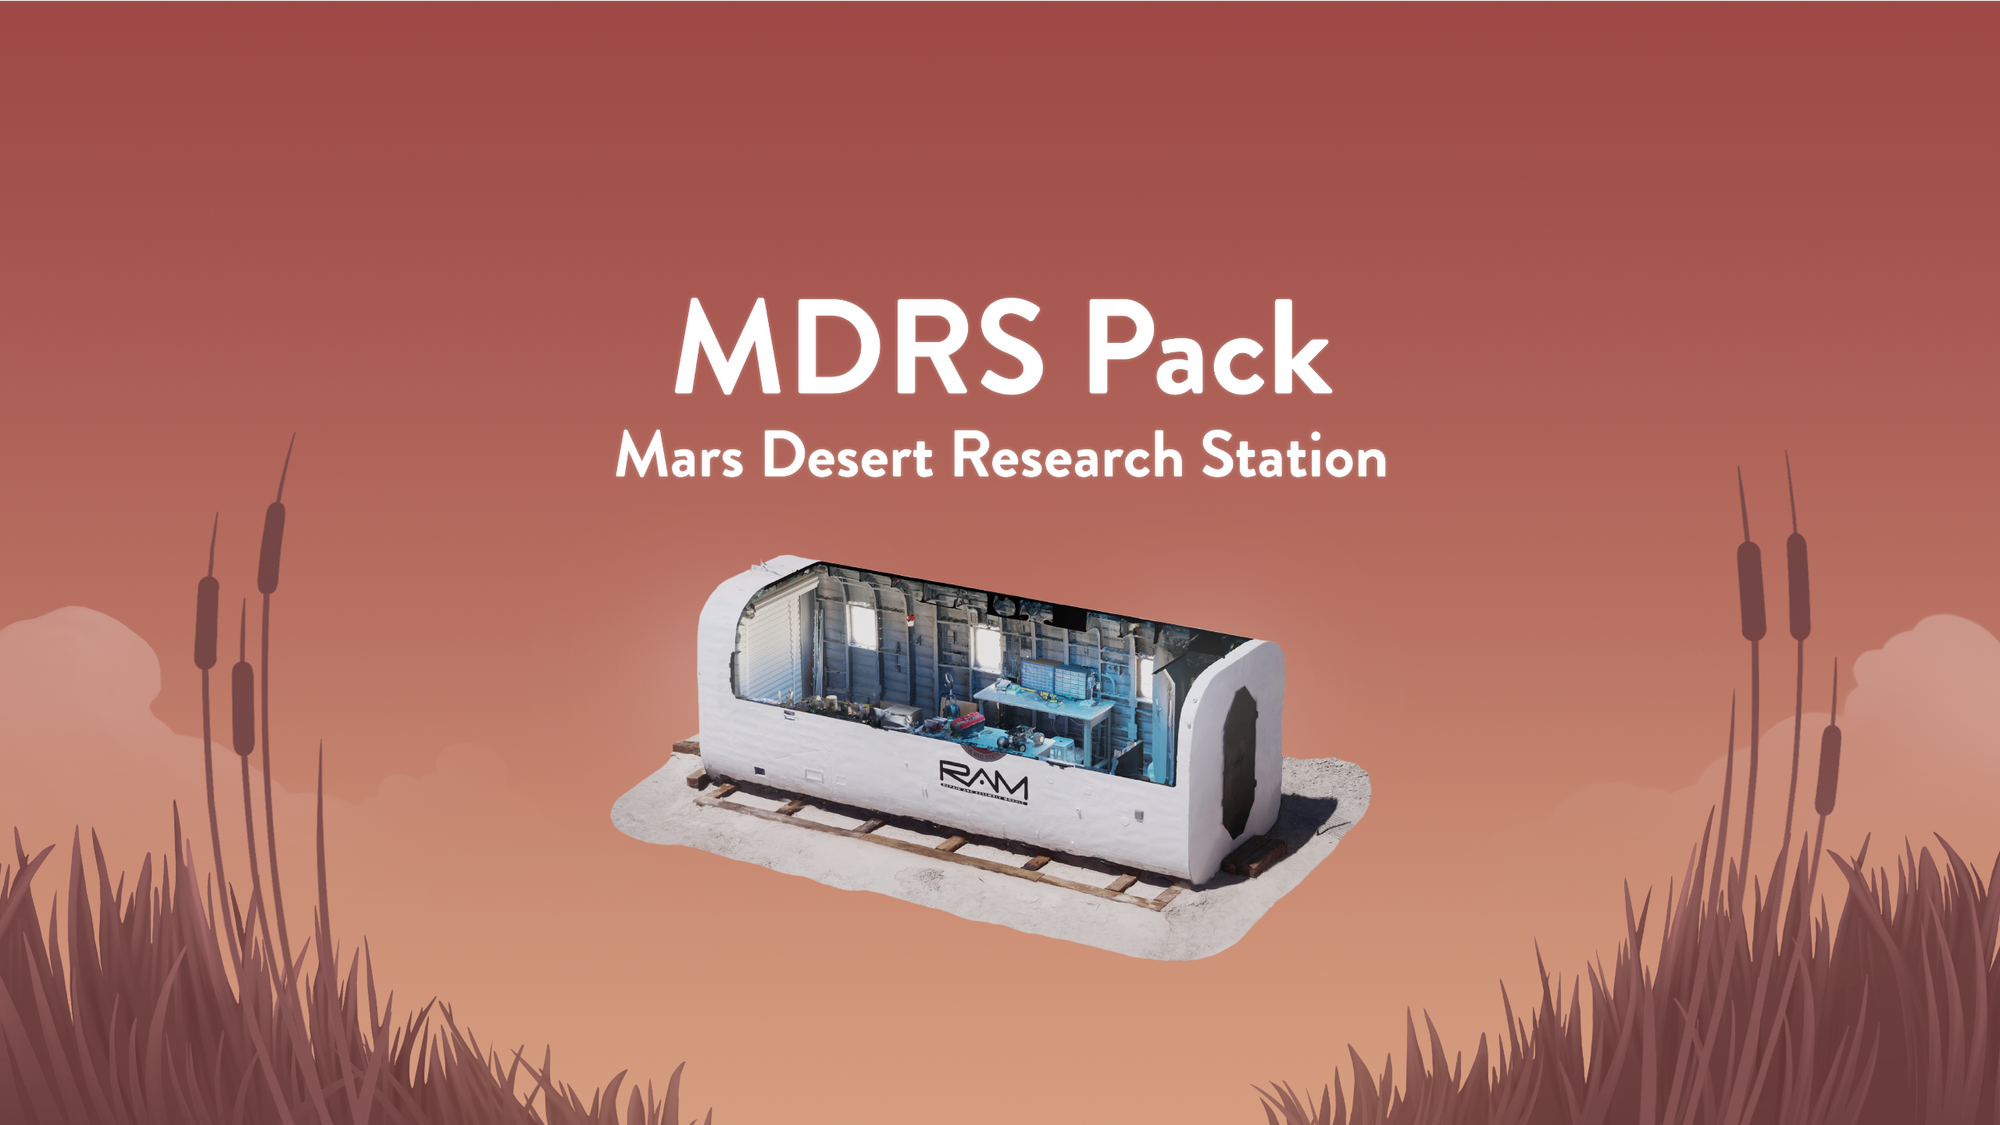 The MDRS Pack is NOW AVAILABLE!